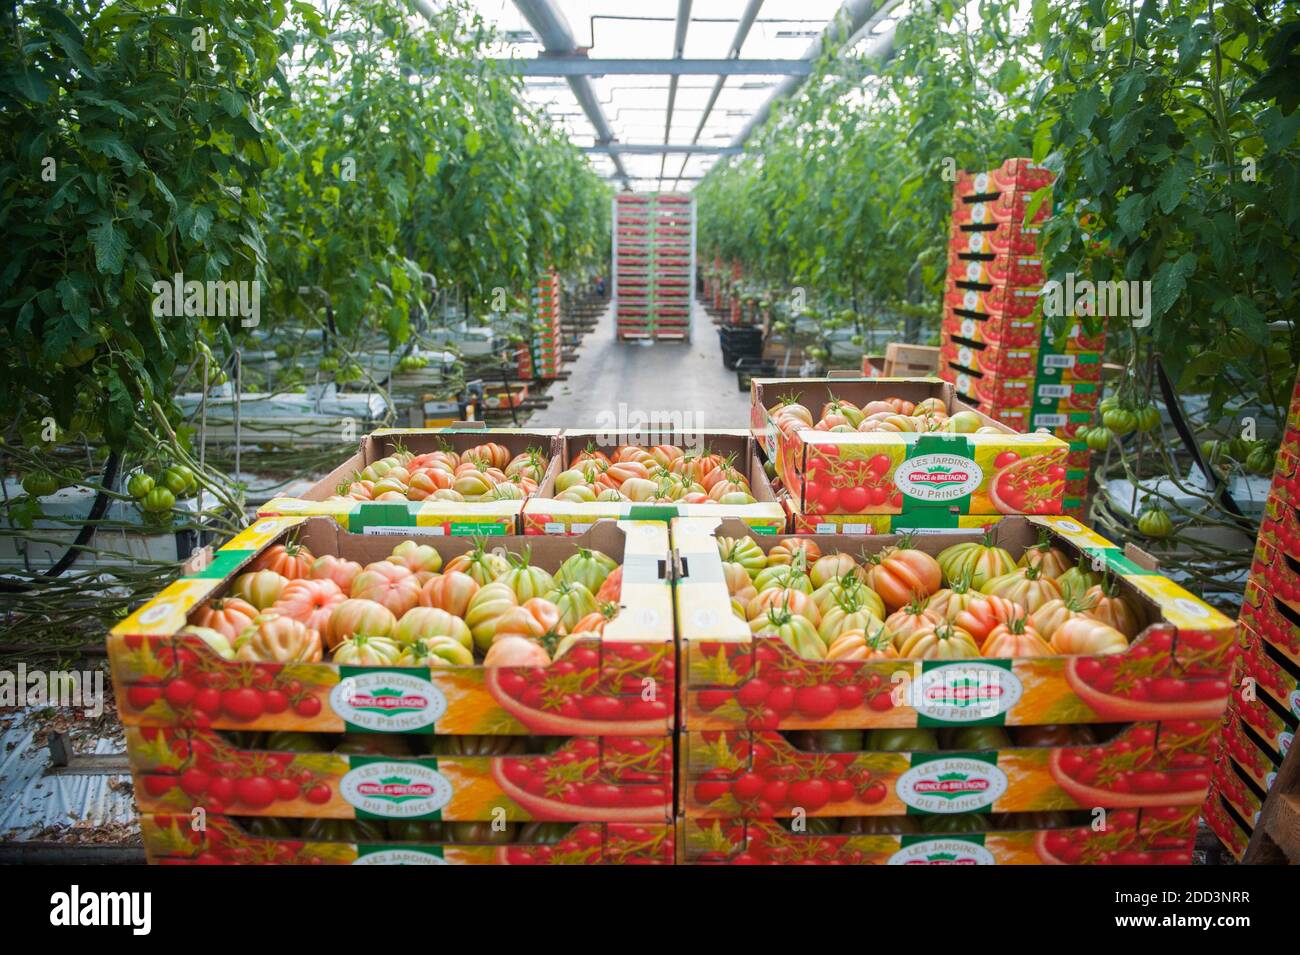 Plouescat (Brittany, north-western France): cultivation of tomatoes under a greenhouse for the producer “Prince de Bretagne” Stock Photo